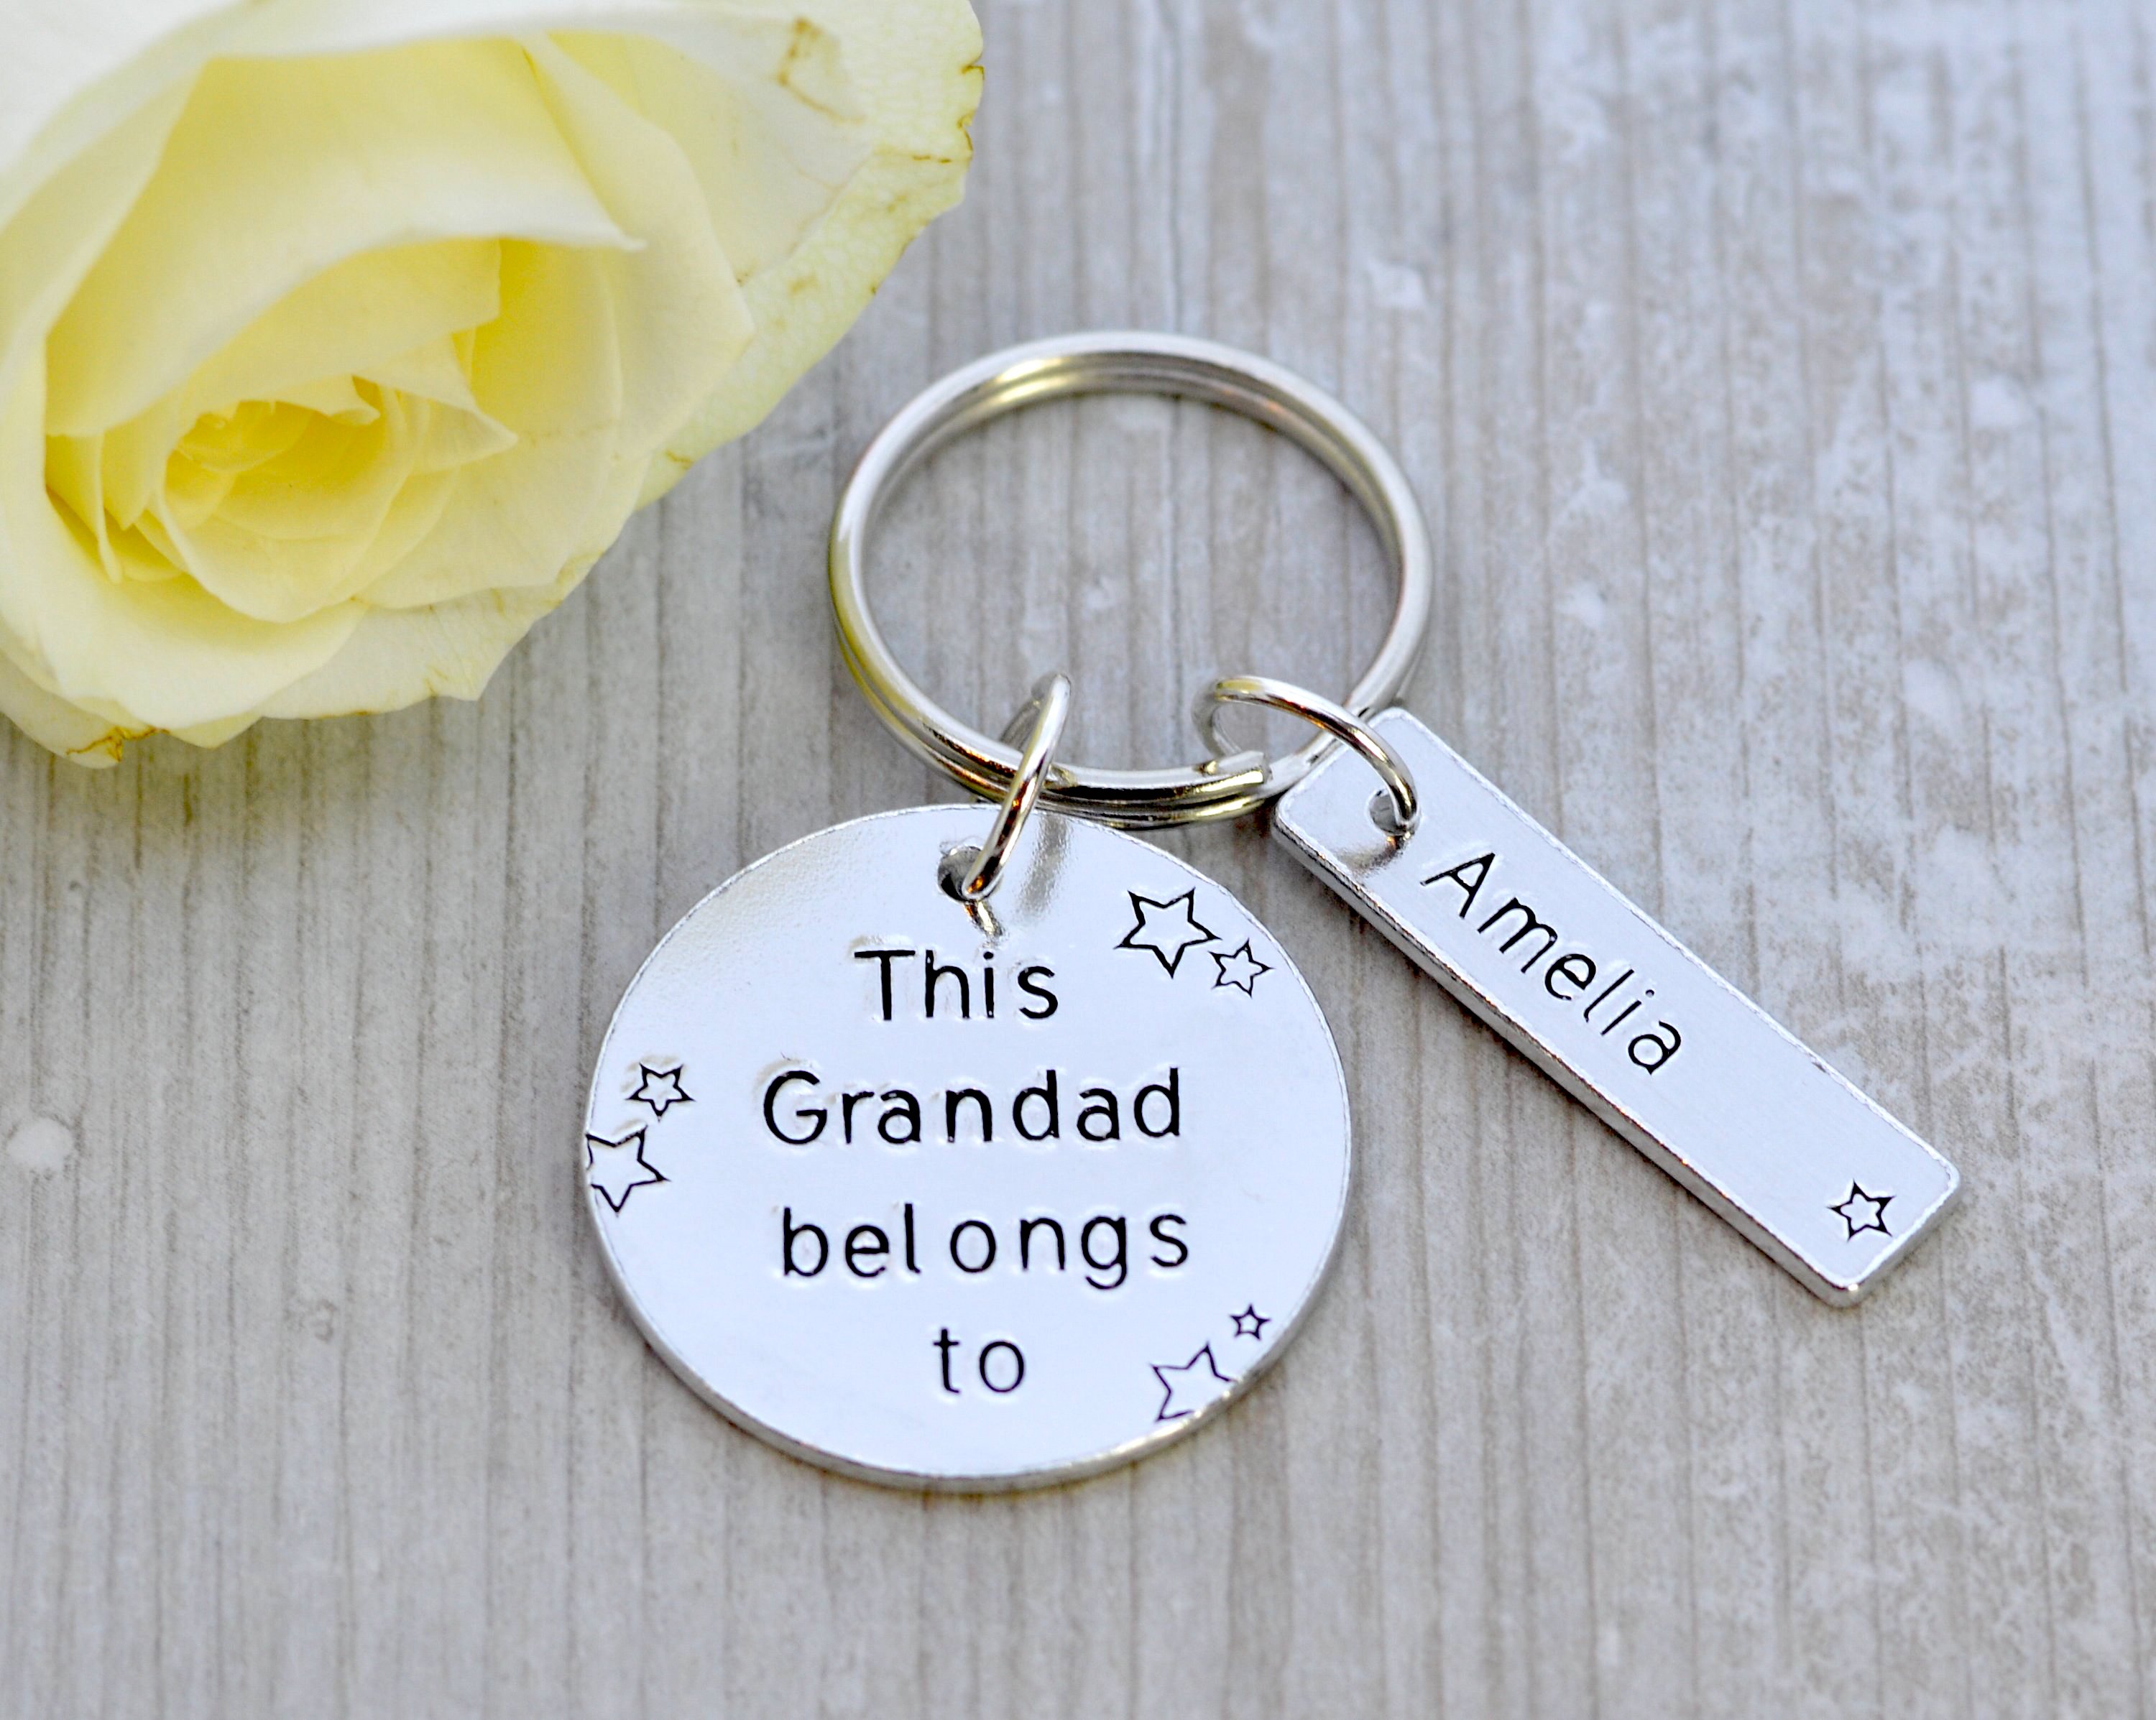 Special grandparent gift ideas for the holidays: Personalized granddad belongs to... keychain | How charming by Lucy